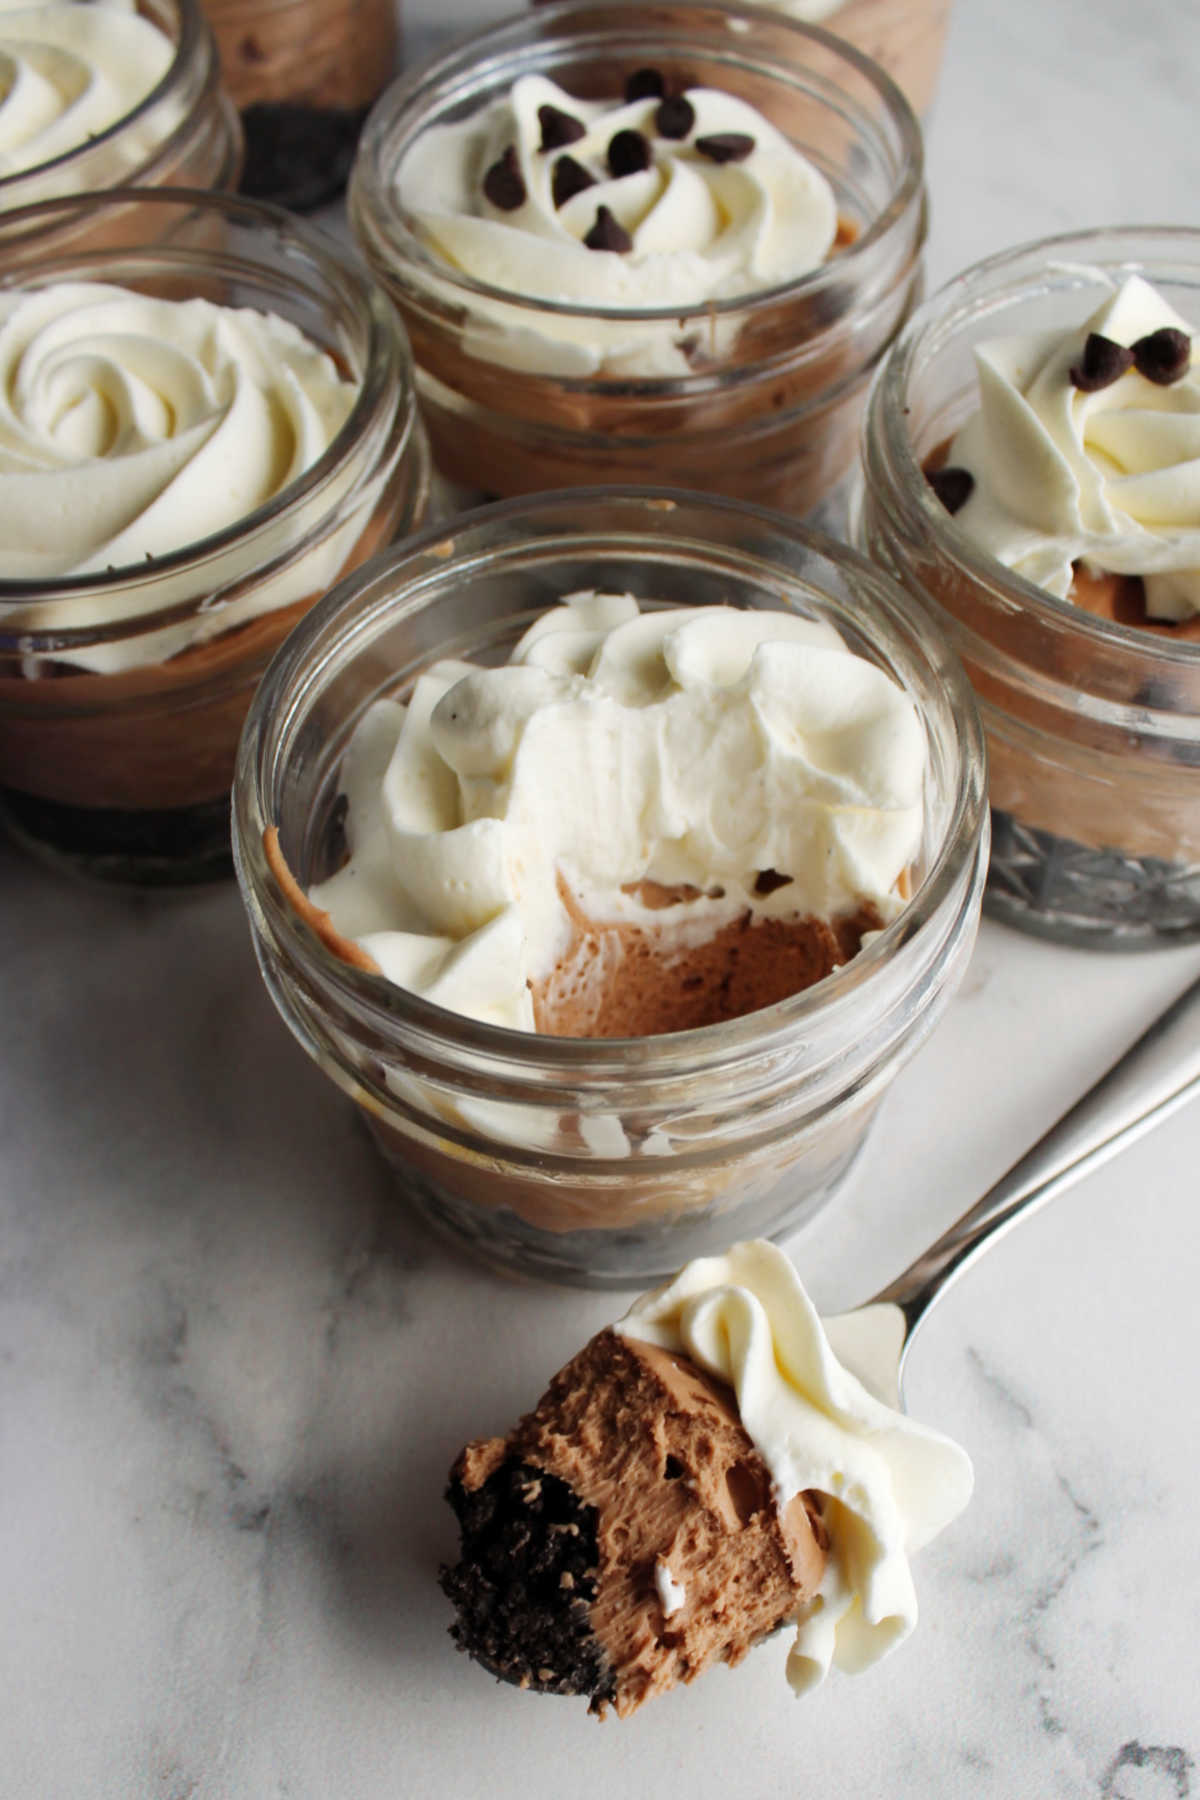 Small ball jars filled with no bake chocolate cheesecake and whipped cream with some on spoon showing layers.